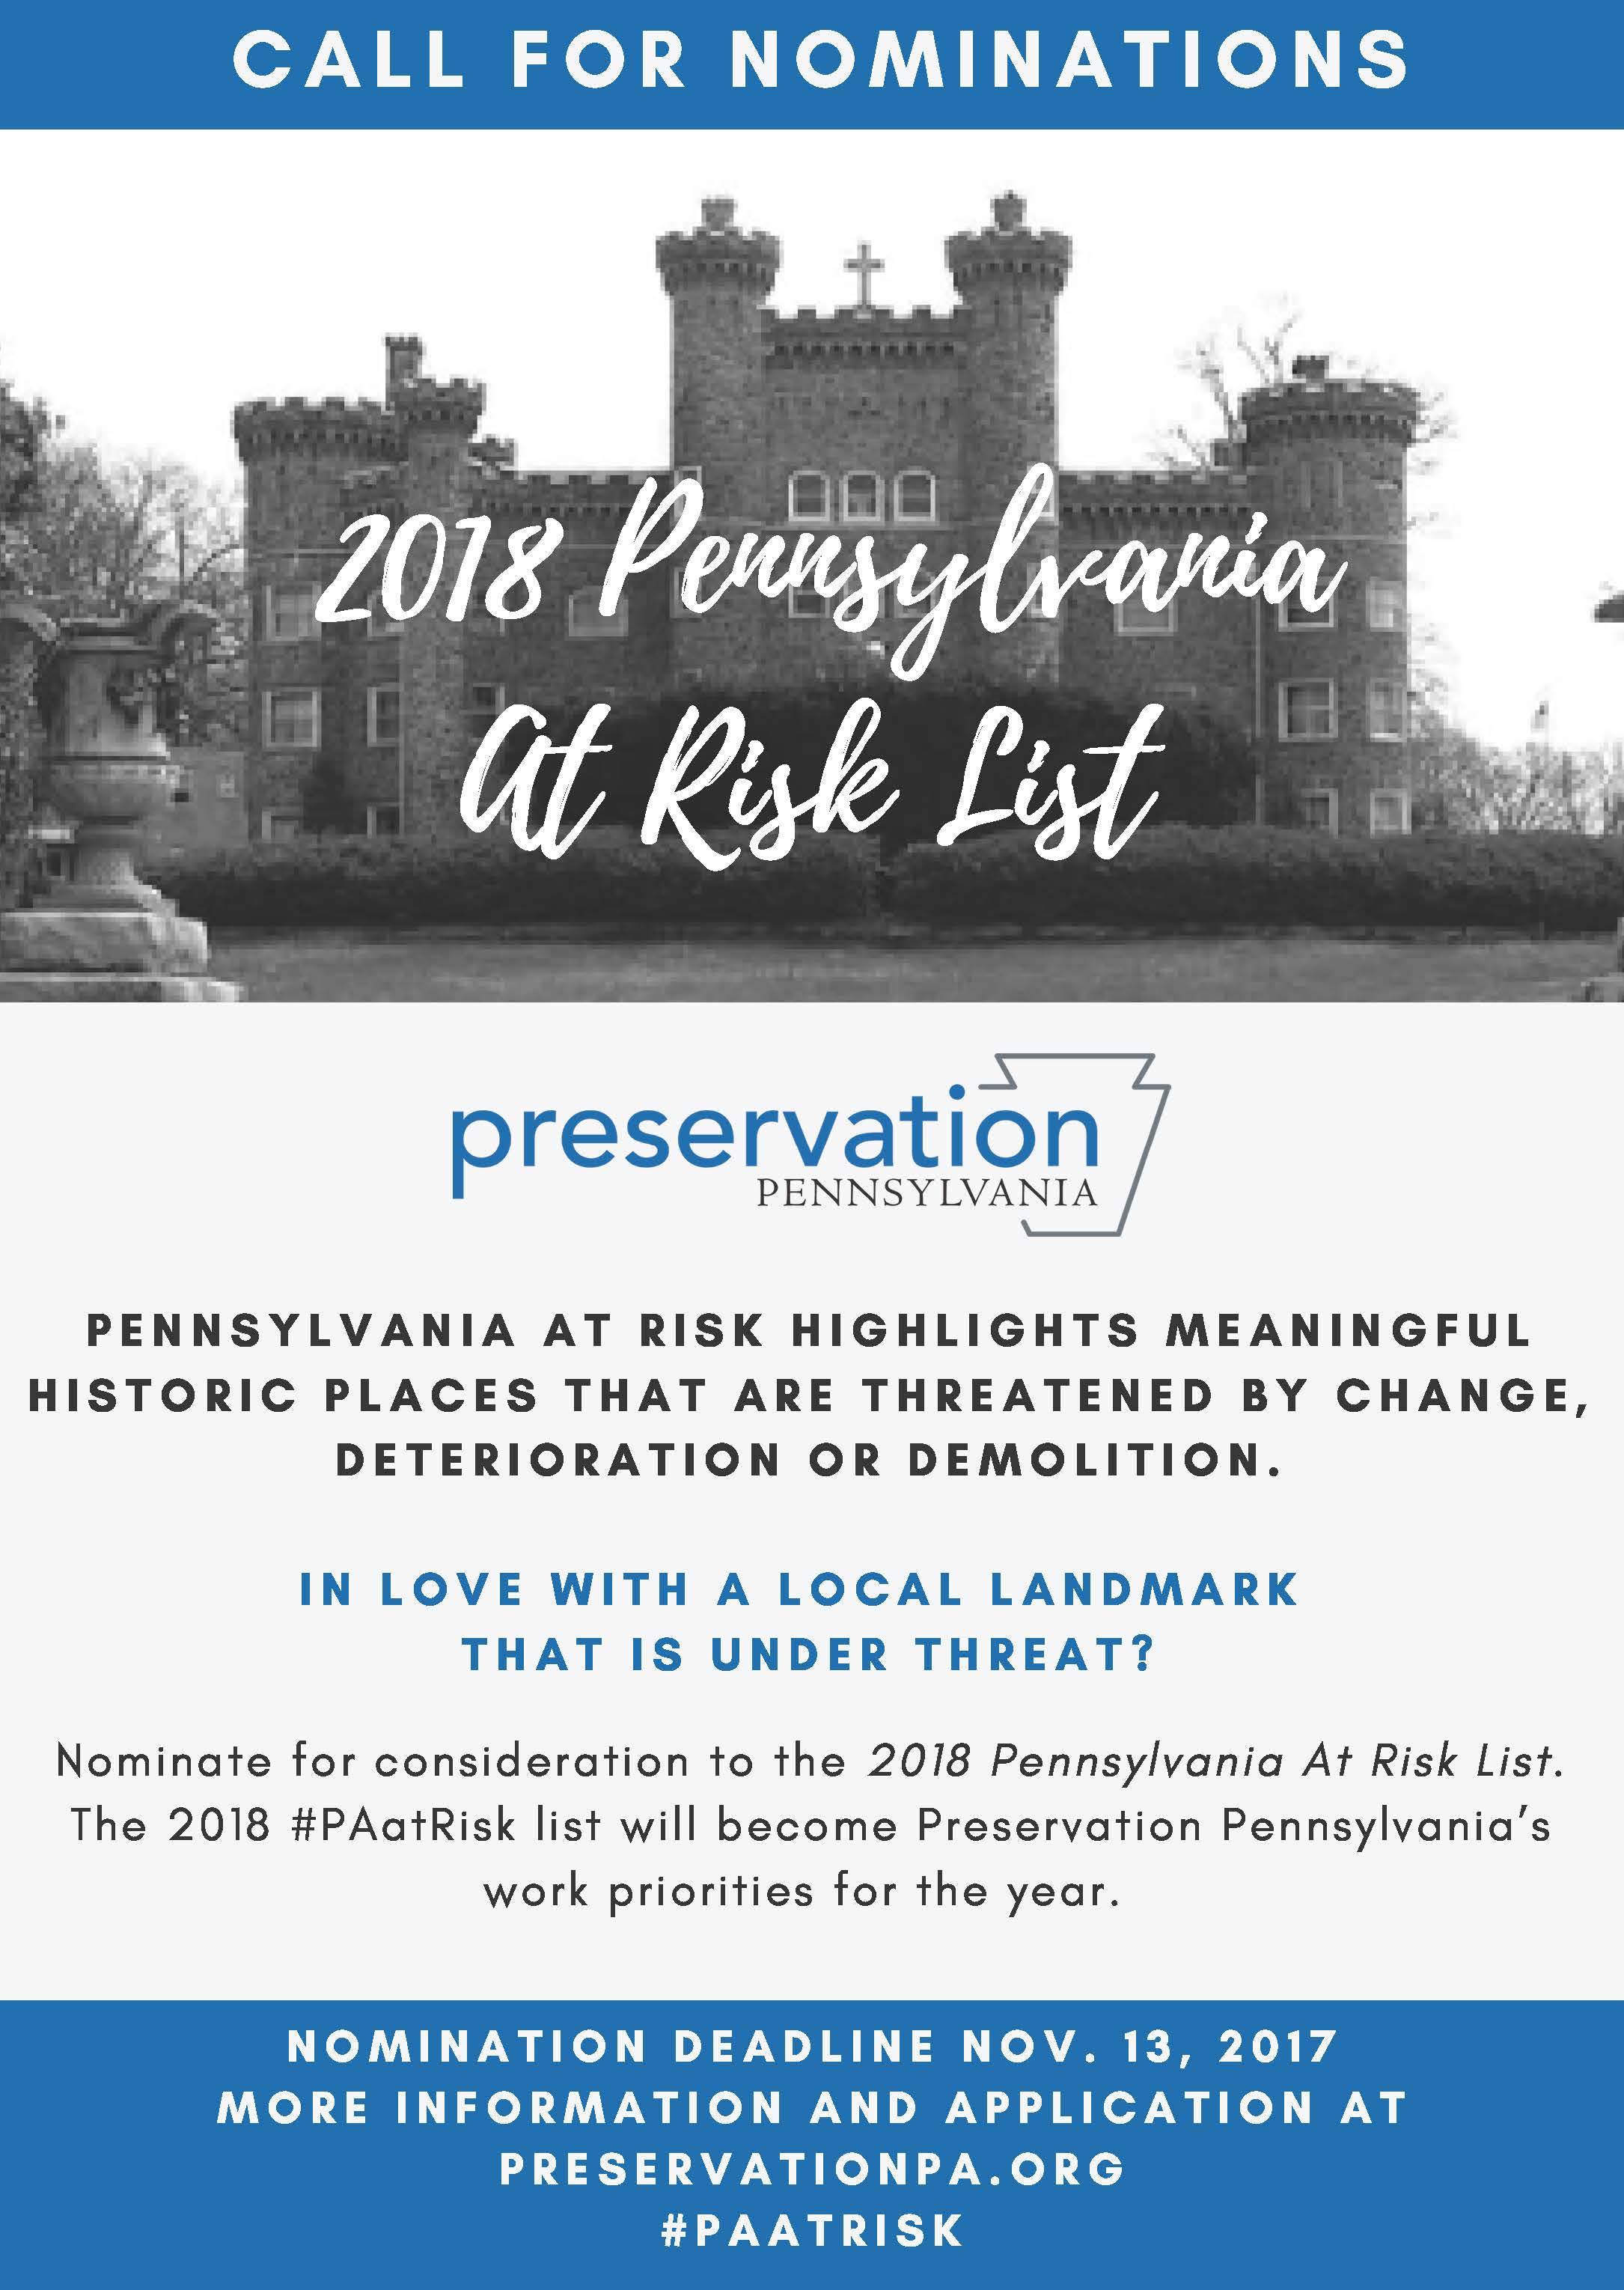 Poster for 2018 PA At Risk showing a black and white photograph of a building and instructions on how to nominate a threatened historic resource.